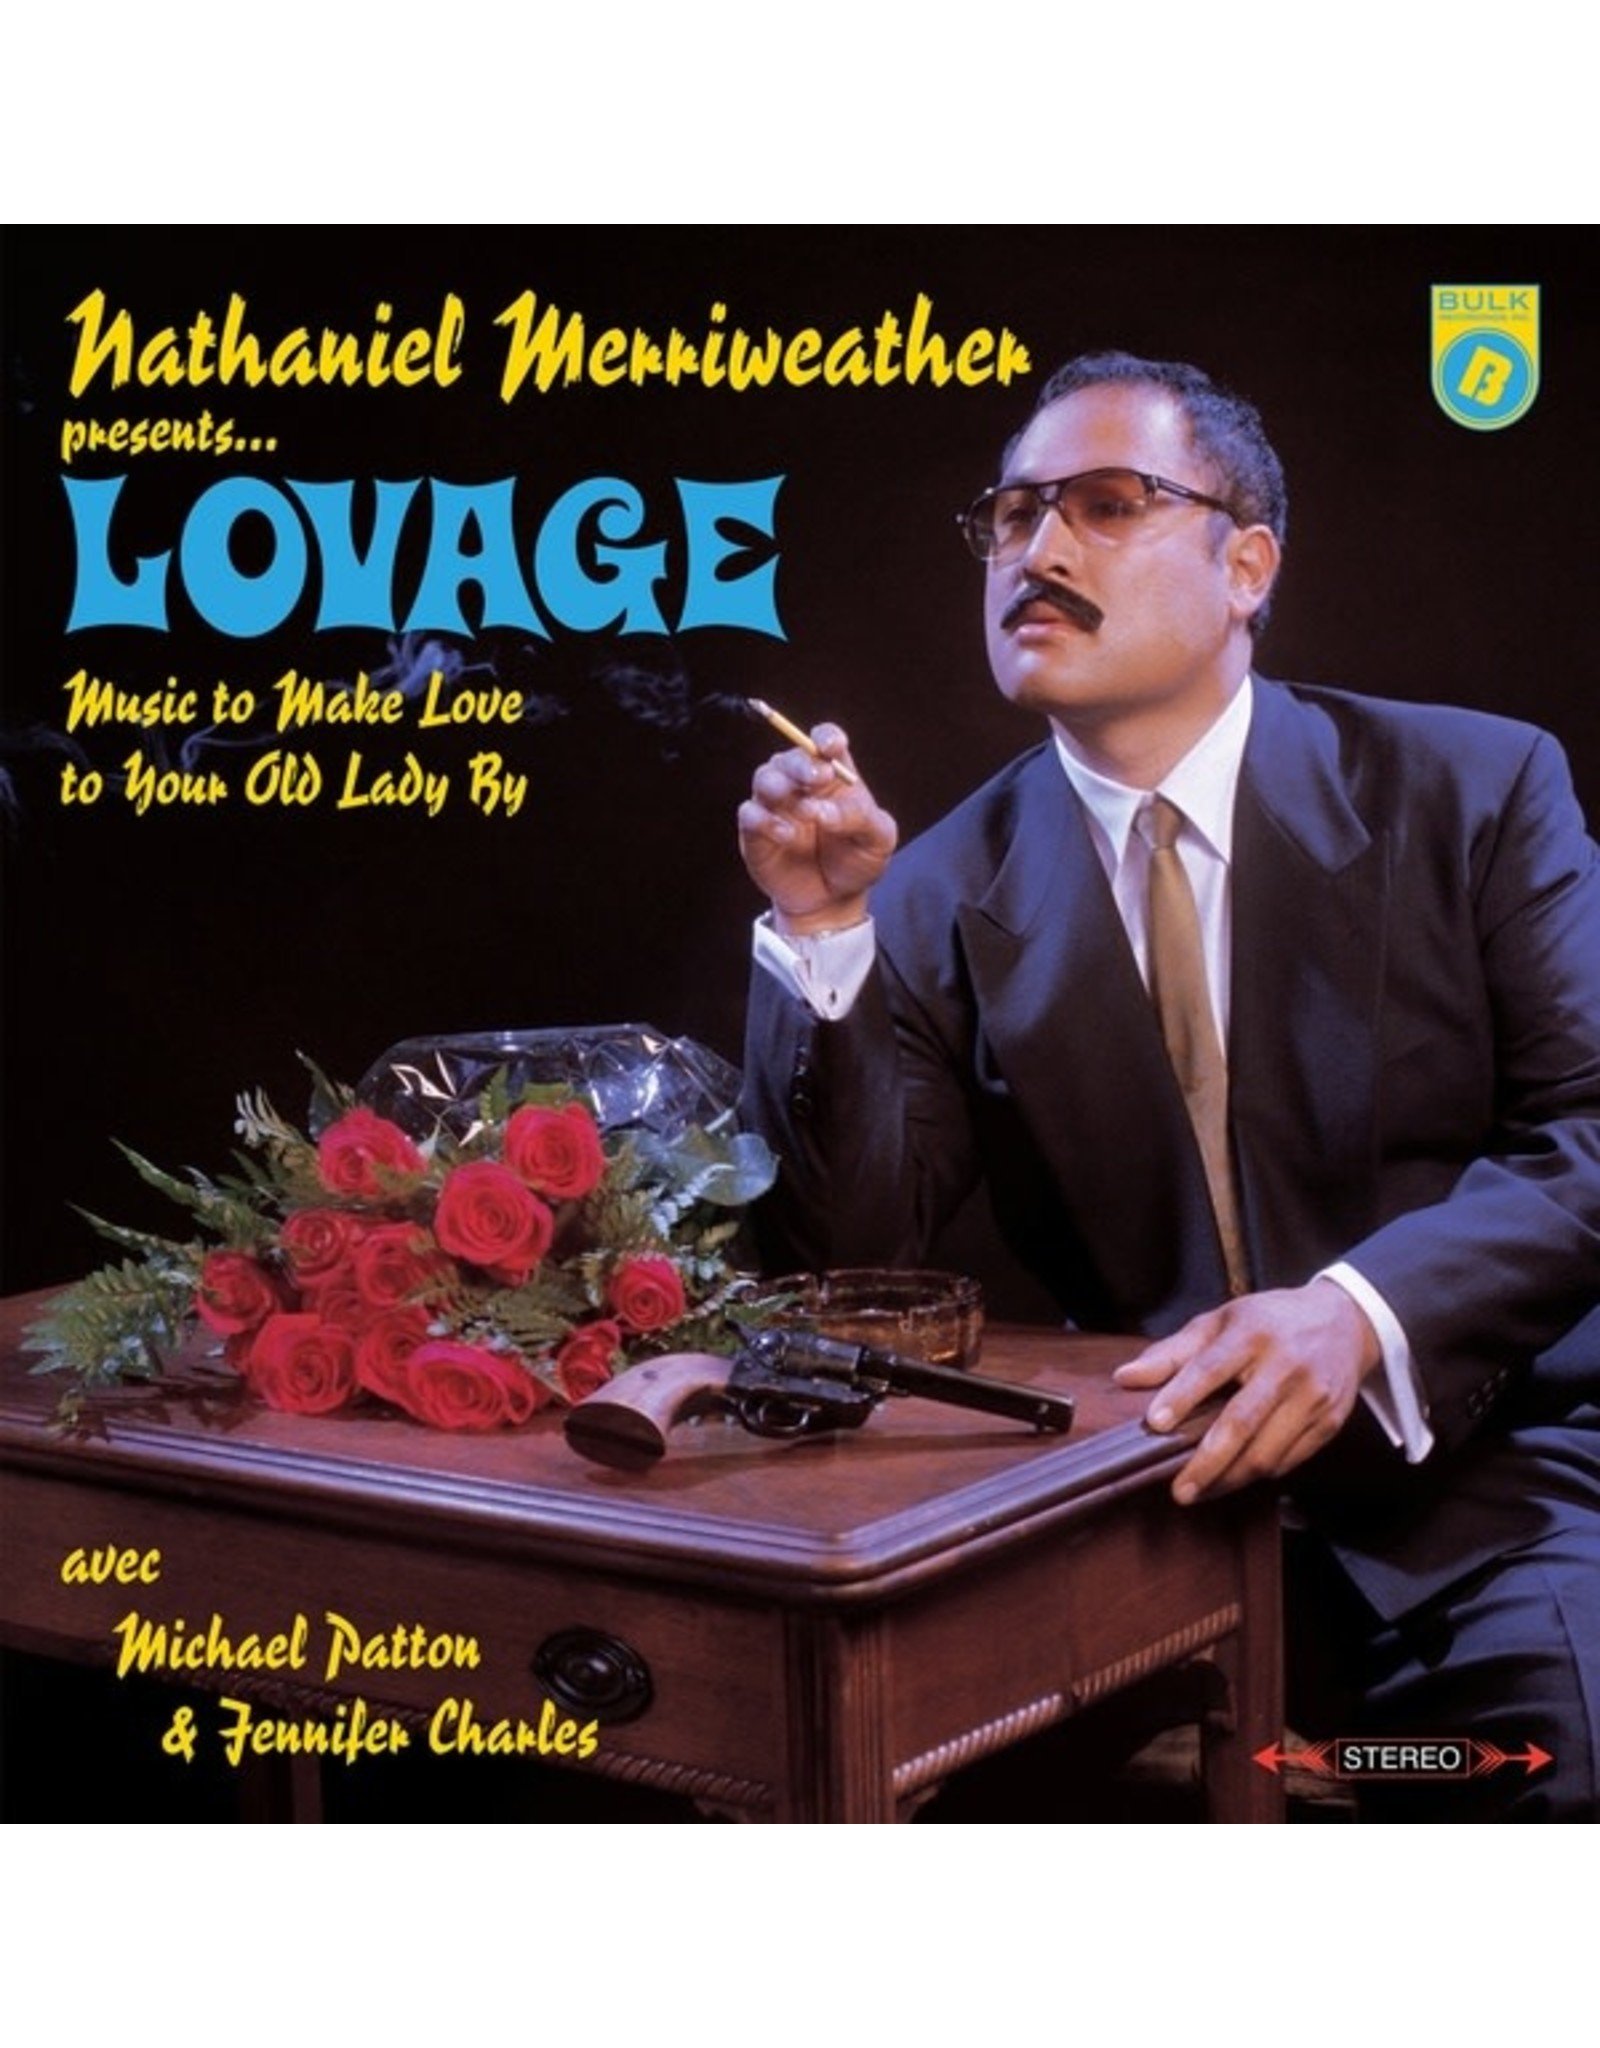 Bulk Lovage: Music To Make Love To Your Old Lady By LP